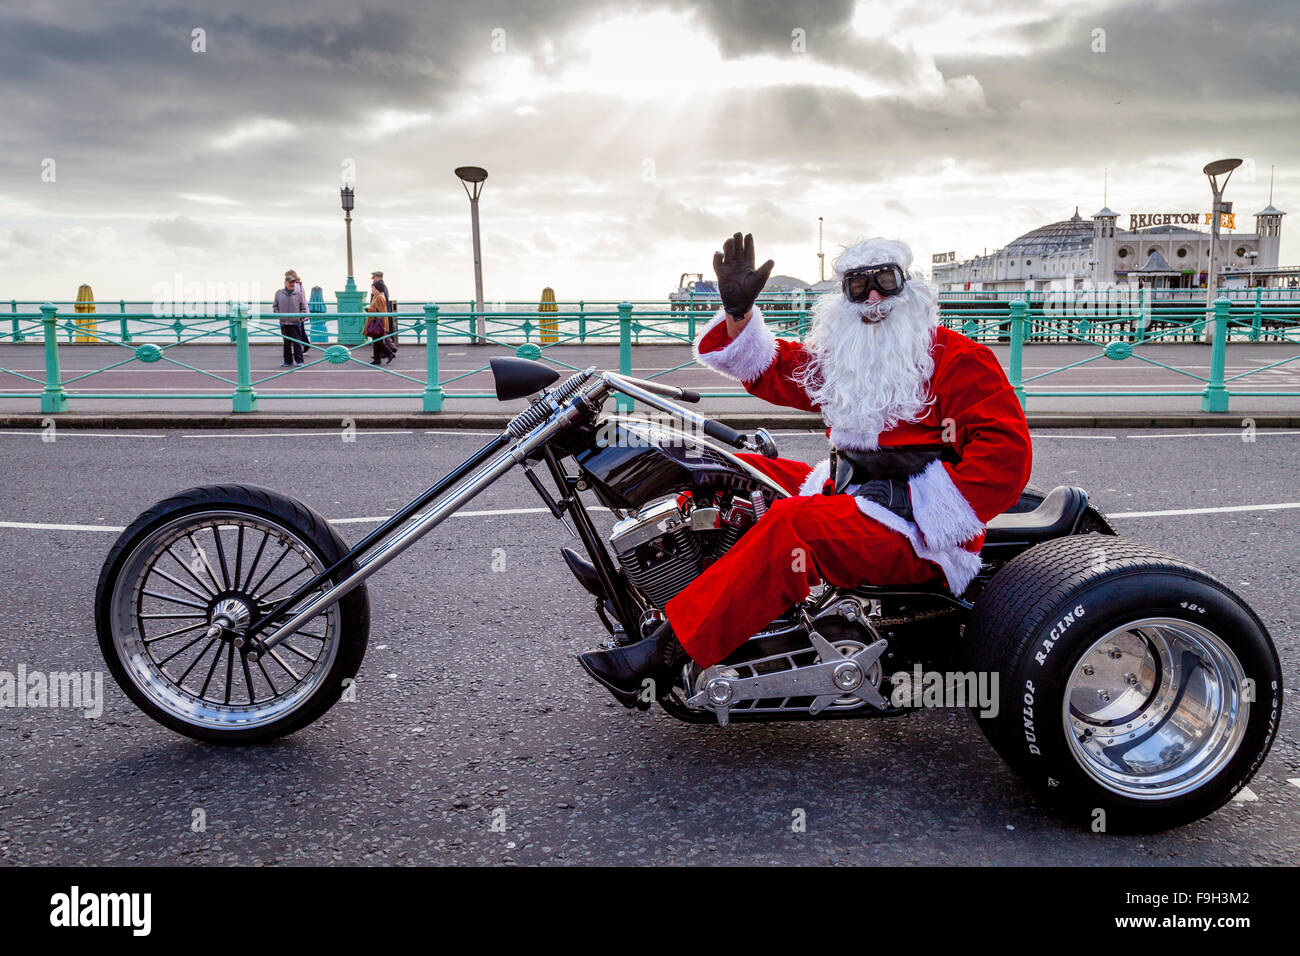 A Man Dressed As Santa Claus Sitting On A Motorcycle Waving, Brighton, Sussex, UK Stock Photo